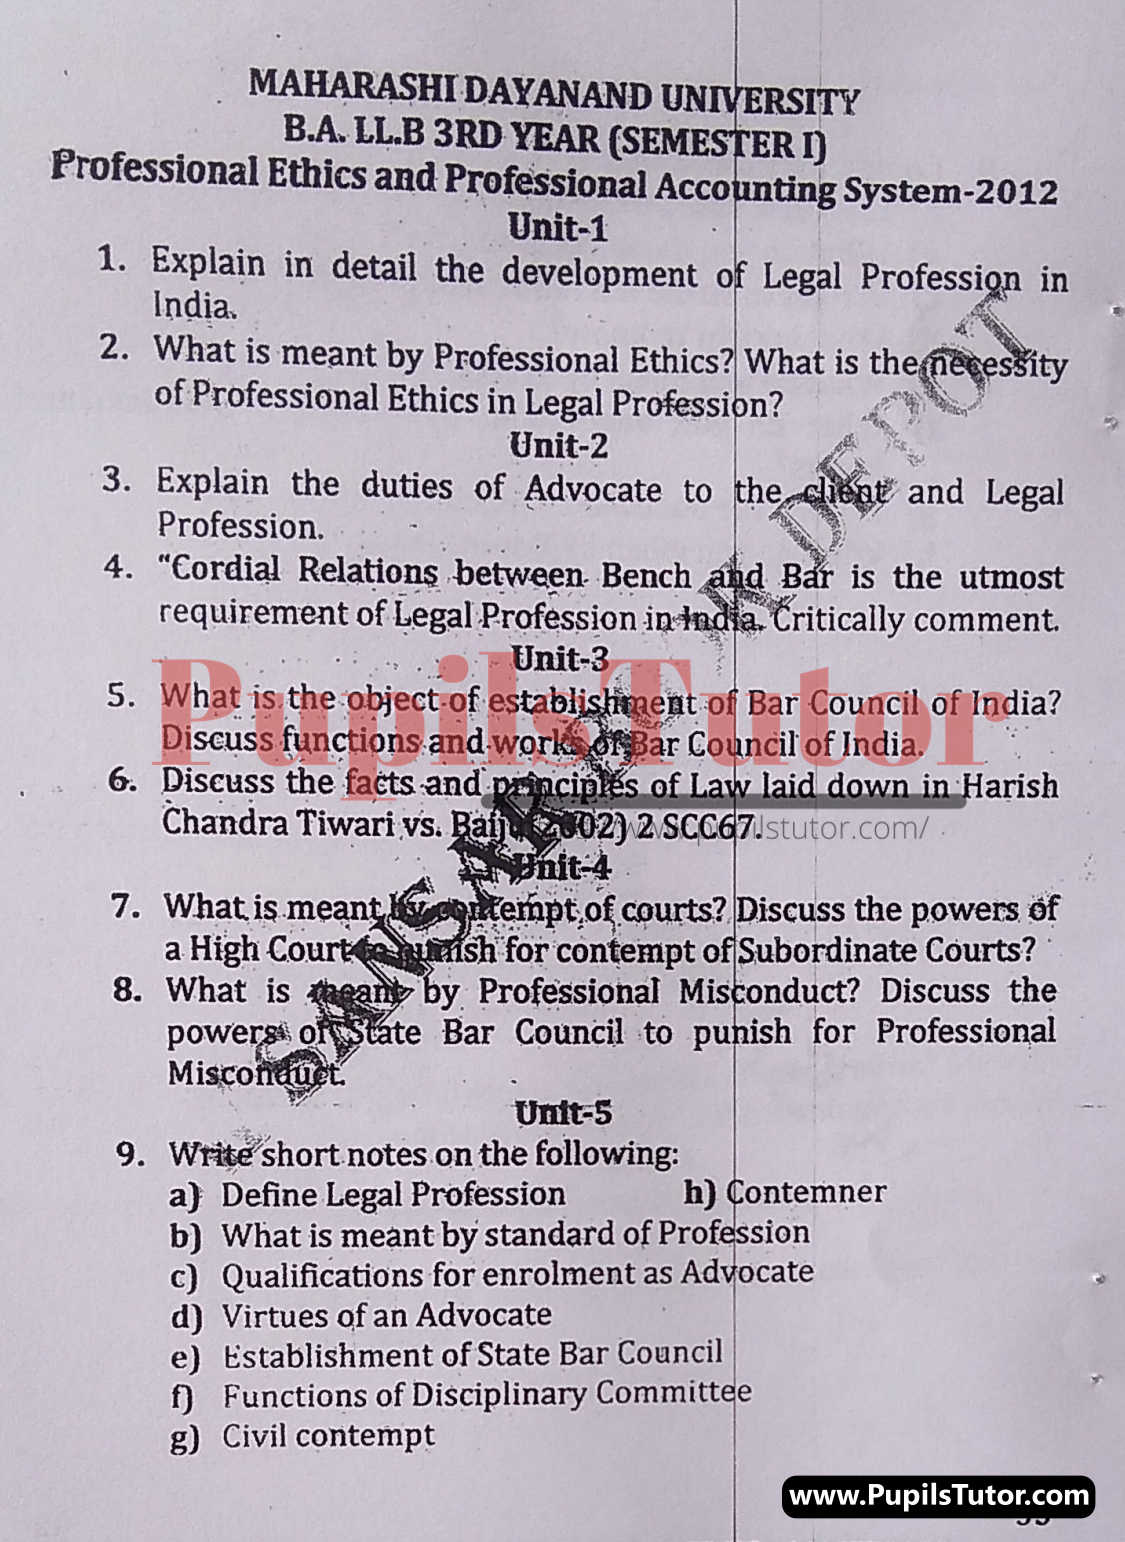 MDU (Maharshi Dayanand University, Rohtak Haryana) LLB Regular Exam (Hons.) First Semester Previous Year Professional Ethics And Professional Accounting System Question Paper For 2012 Exam (Question Paper Page 1) - pupilstutor.com